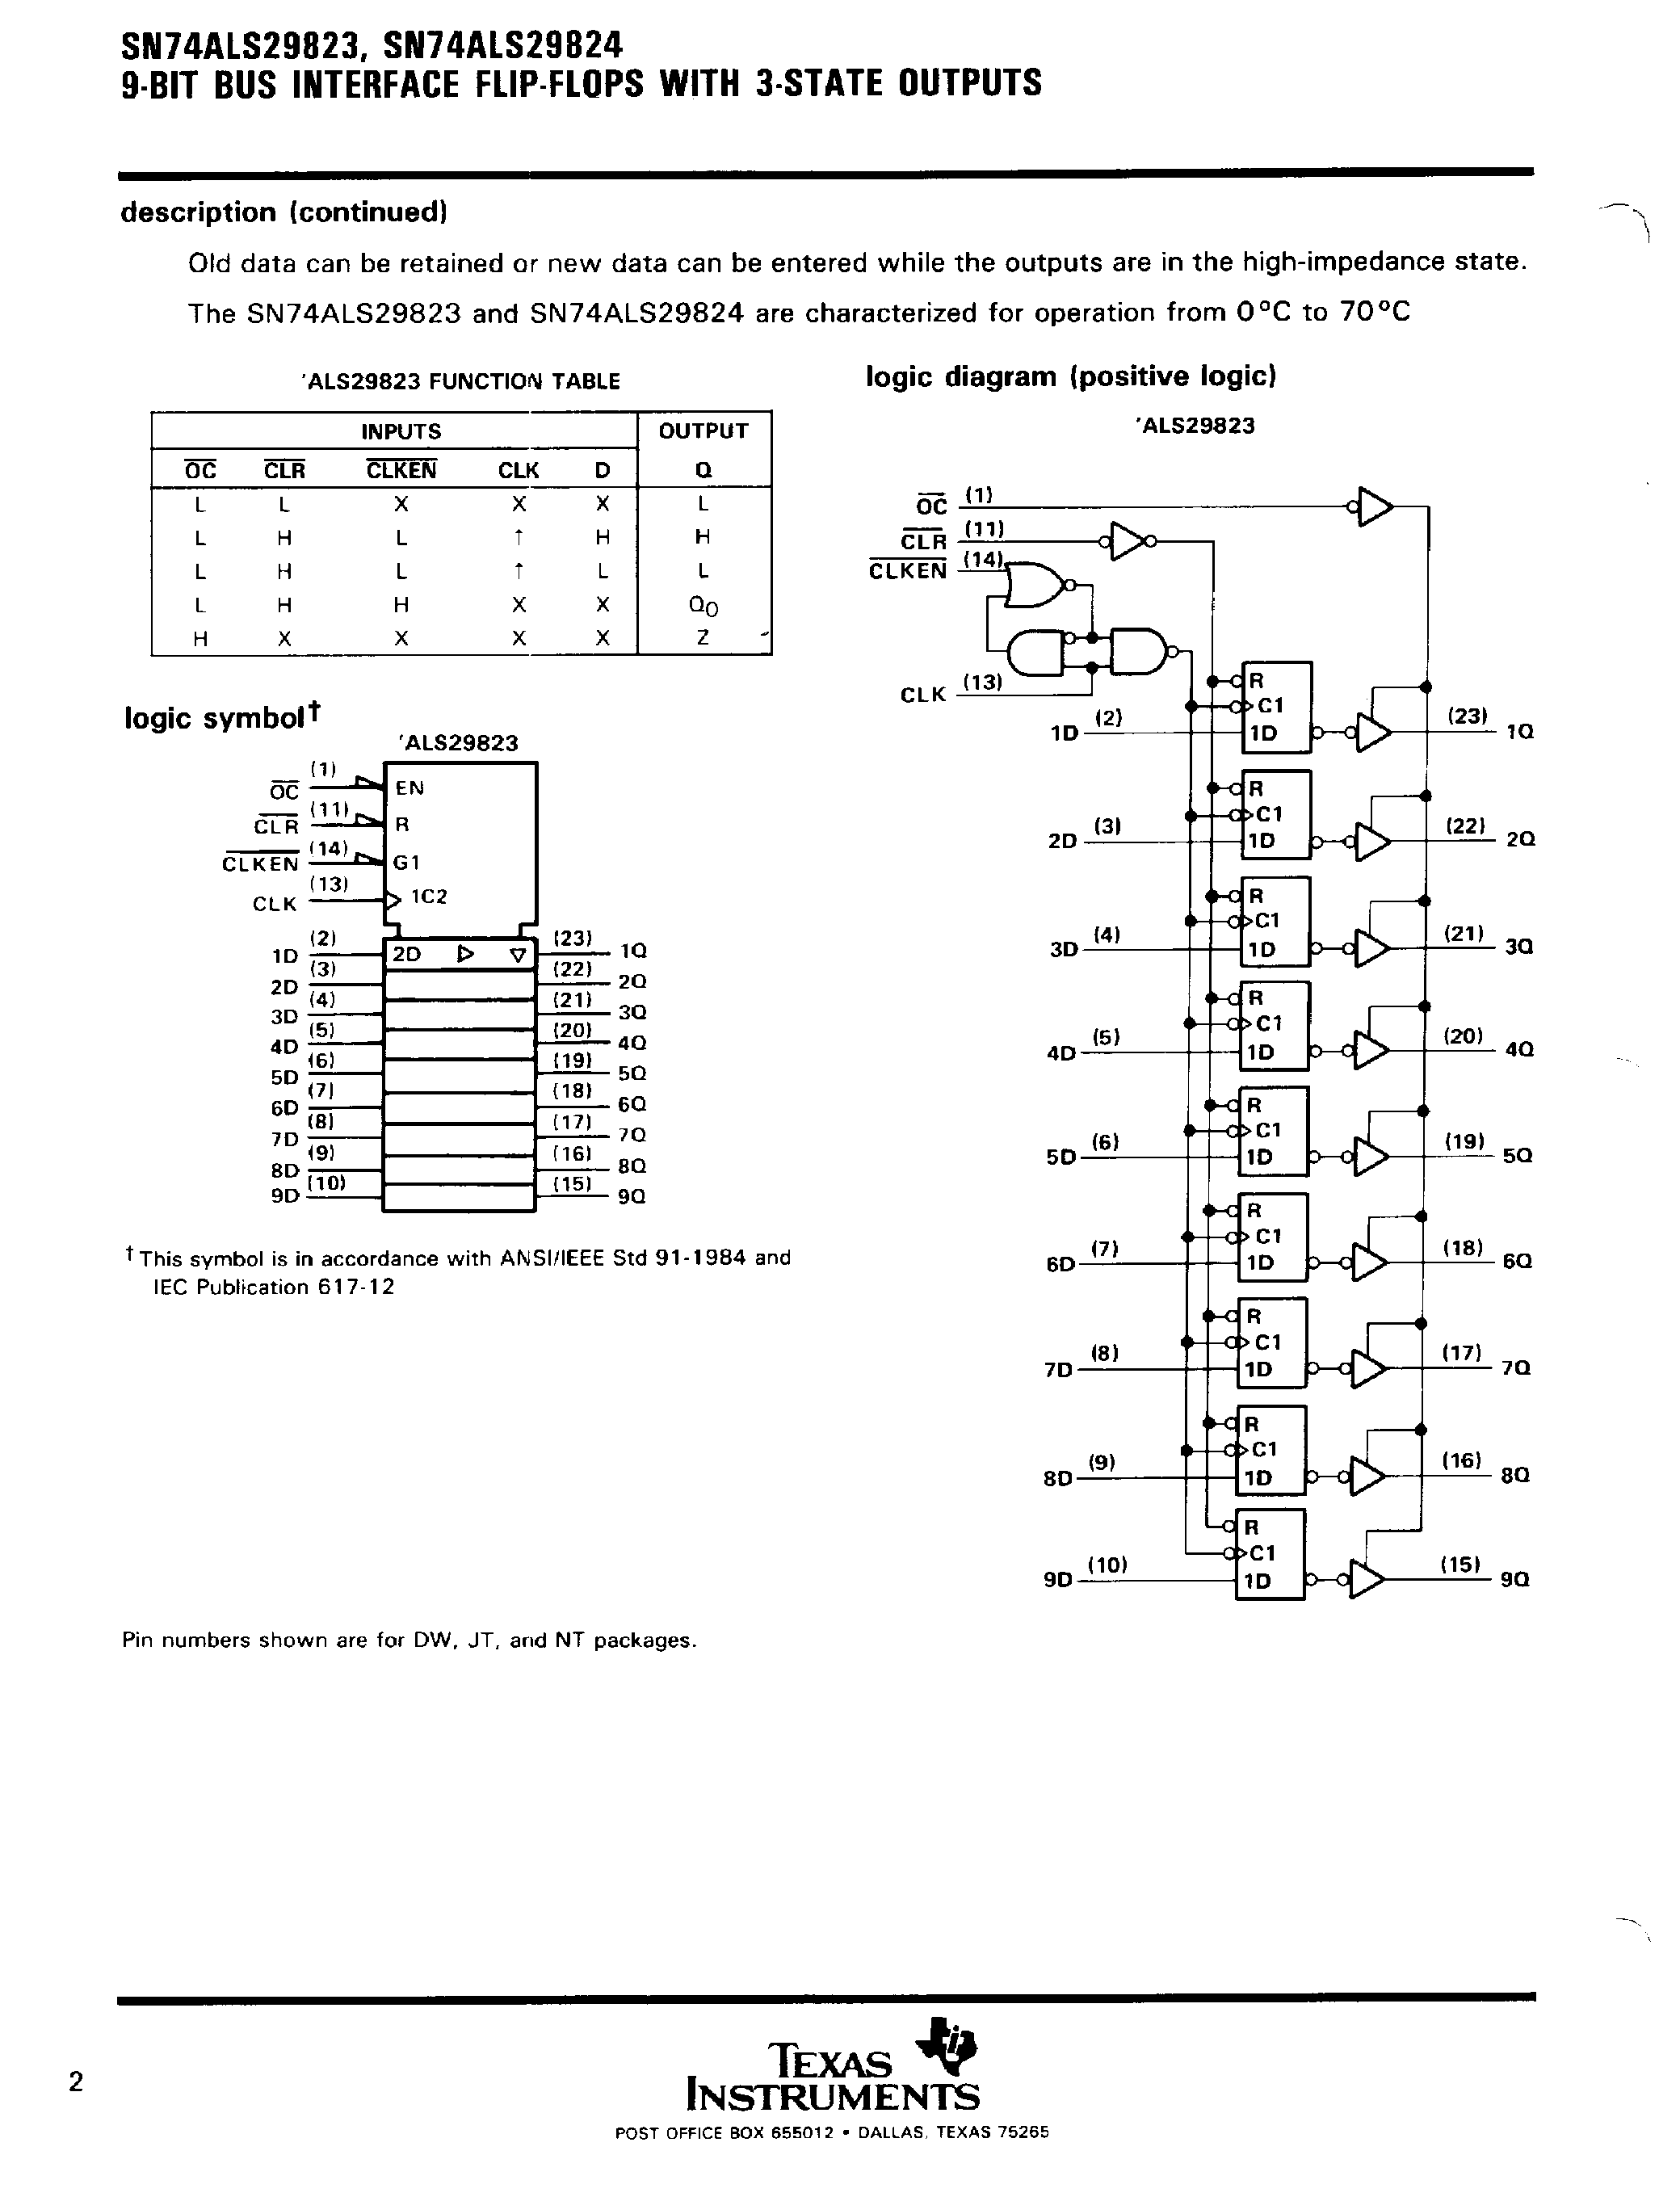 Datasheet SN74ALS29824 - (SN74ALS29823) 9 Bit Bus Interface F-F with 3 State Outputs page 2